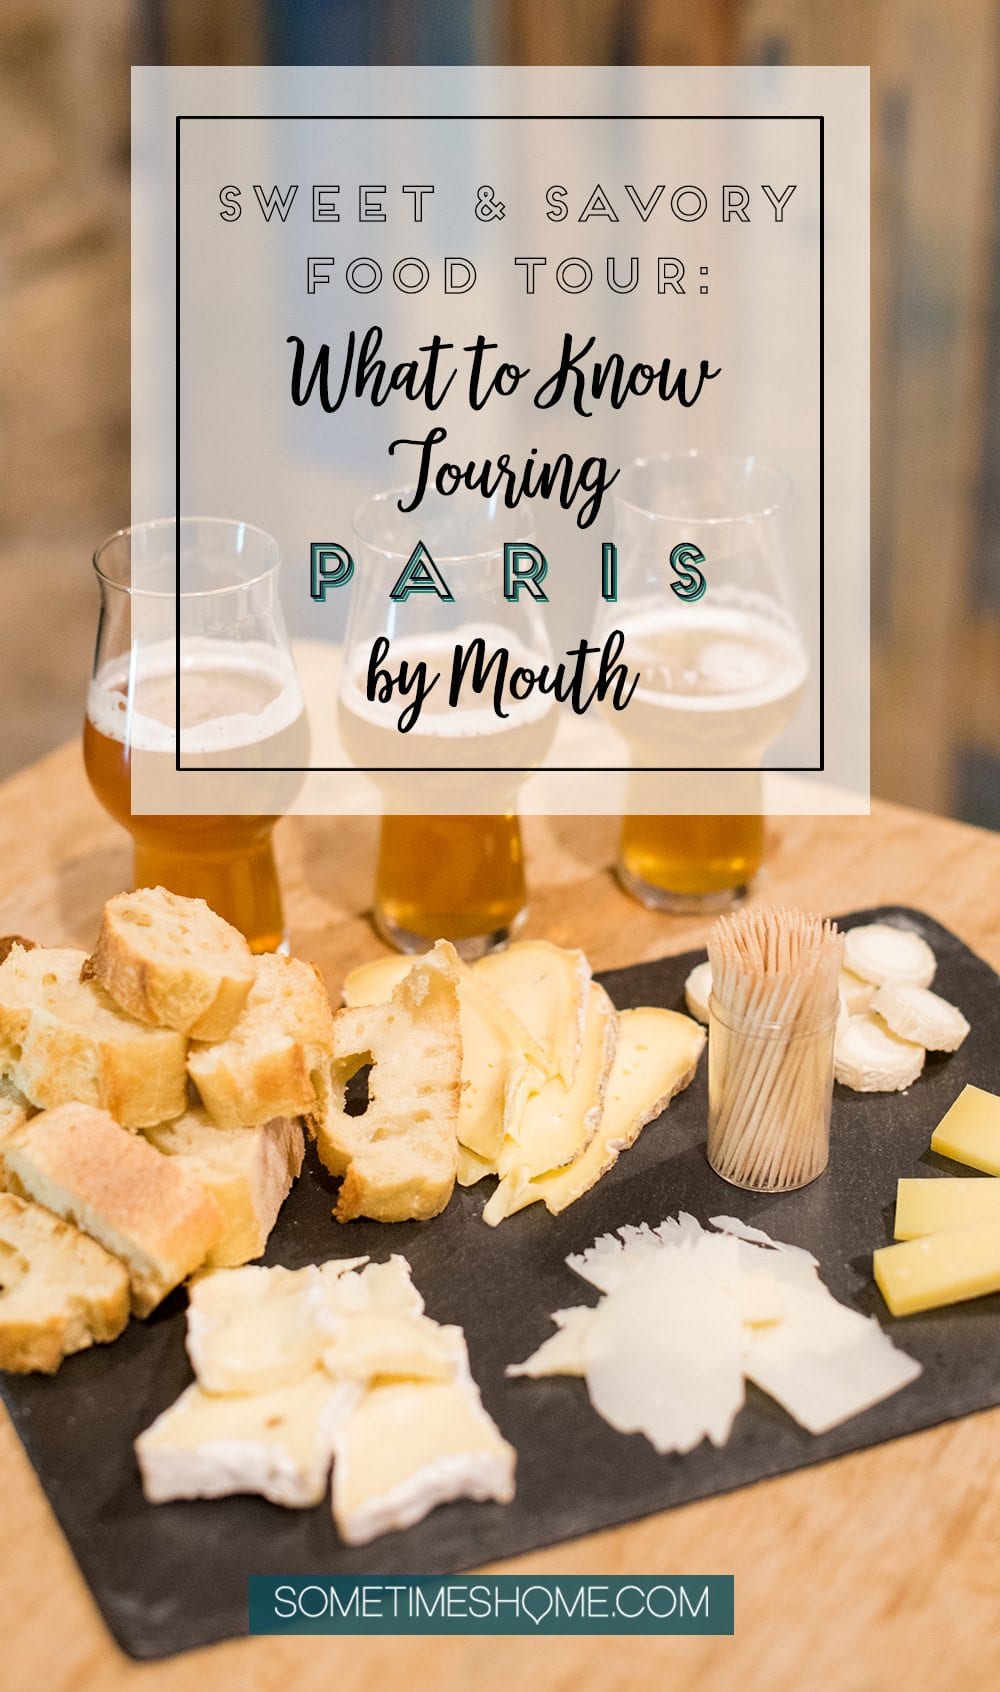 Edible Paris by Mouth Tours on Sometimes Home travel blog. A wonderful Paris food tour with a knowledgable guide, through a popular market in the city. 